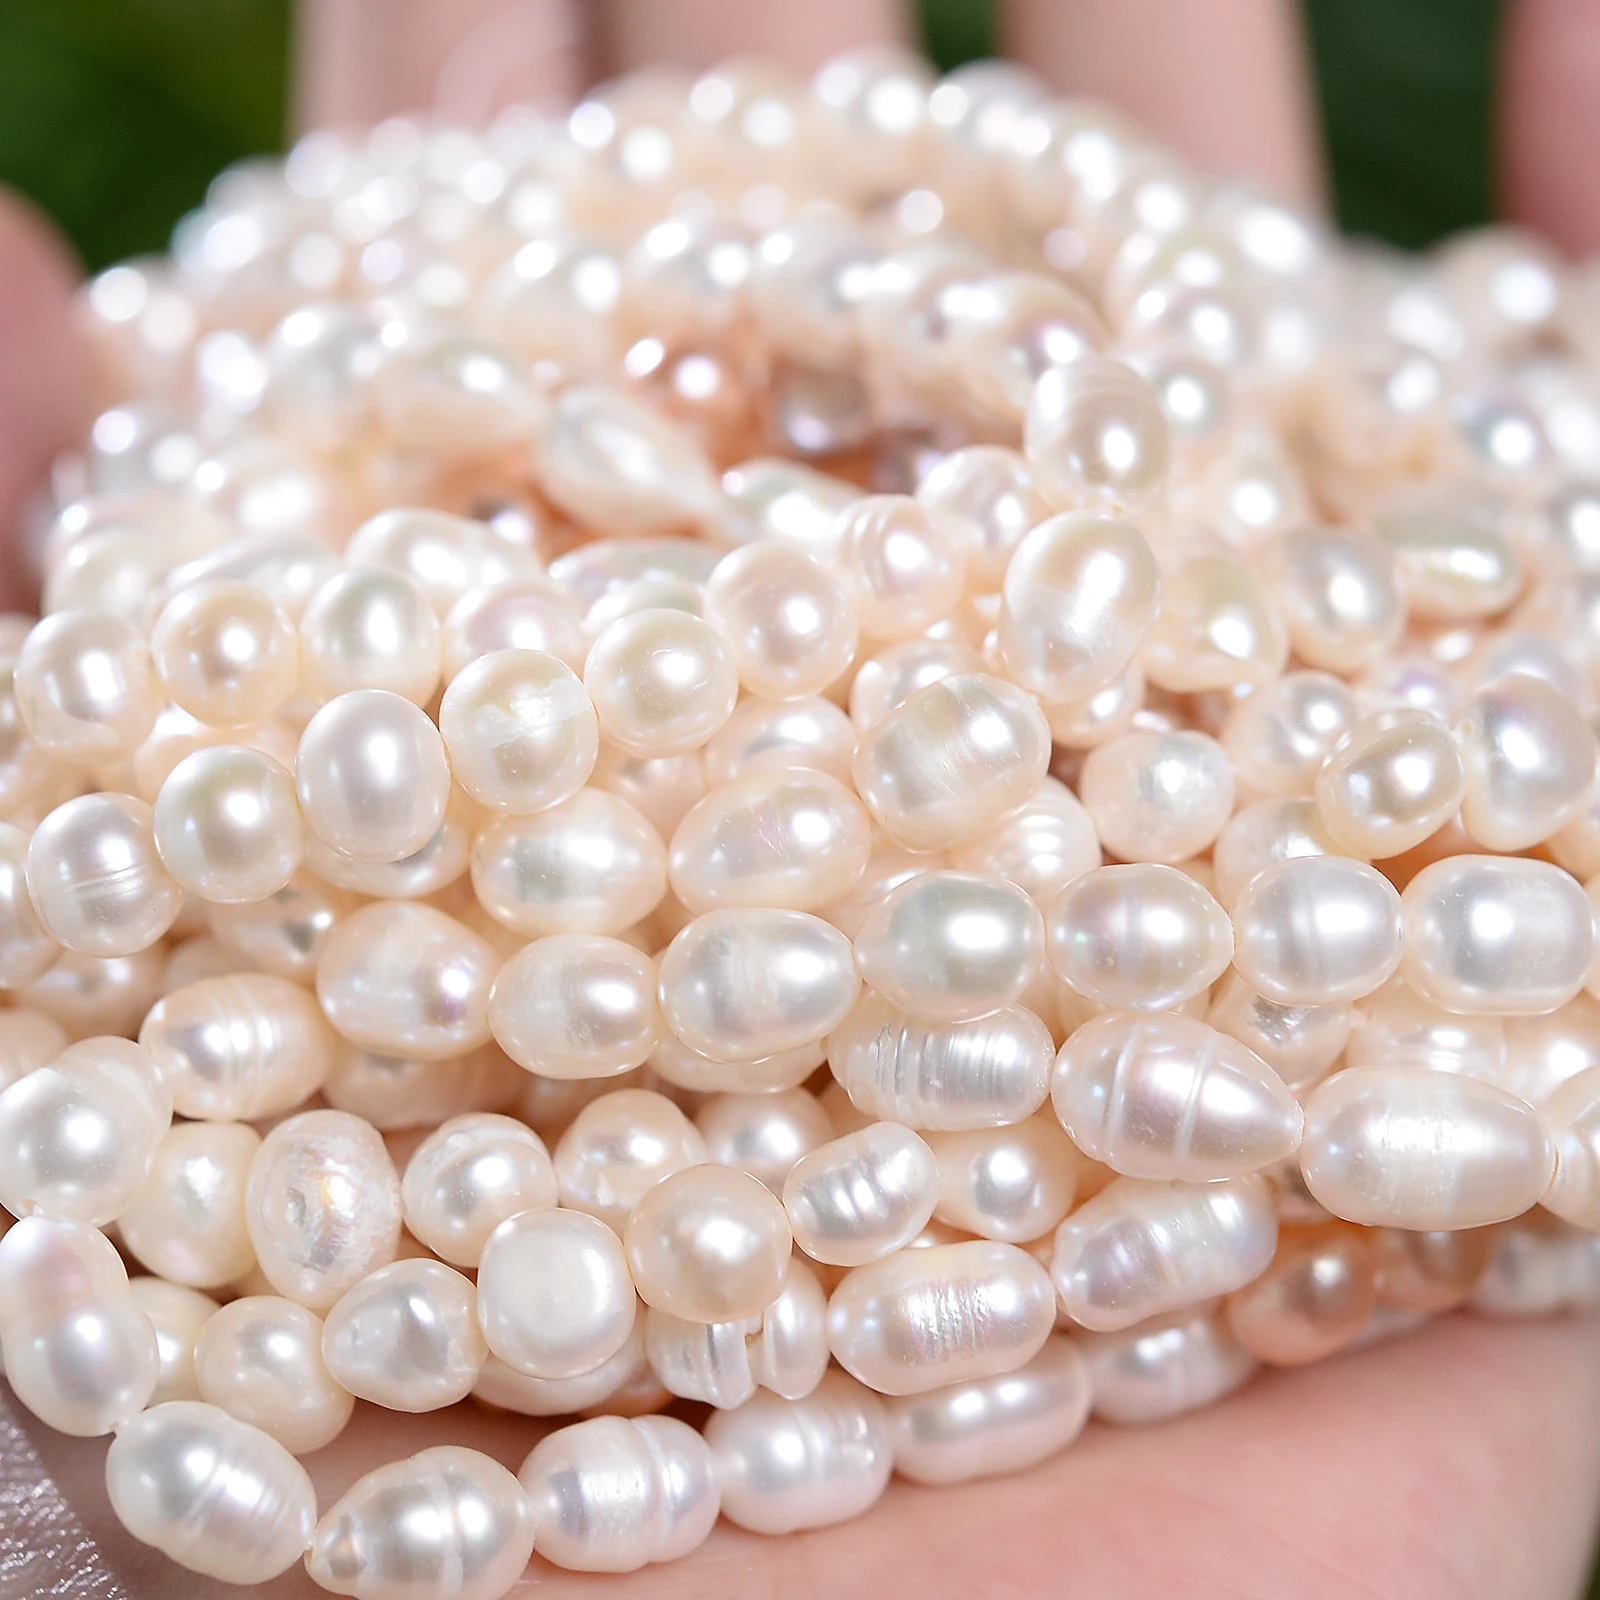 1 Str, Gold Pearl Necklace, Irregular Pearl, AAA, Real Freshwater Pearl,  DIY Pearl Accessories, Multi-Size Pearls, Length 35 cm